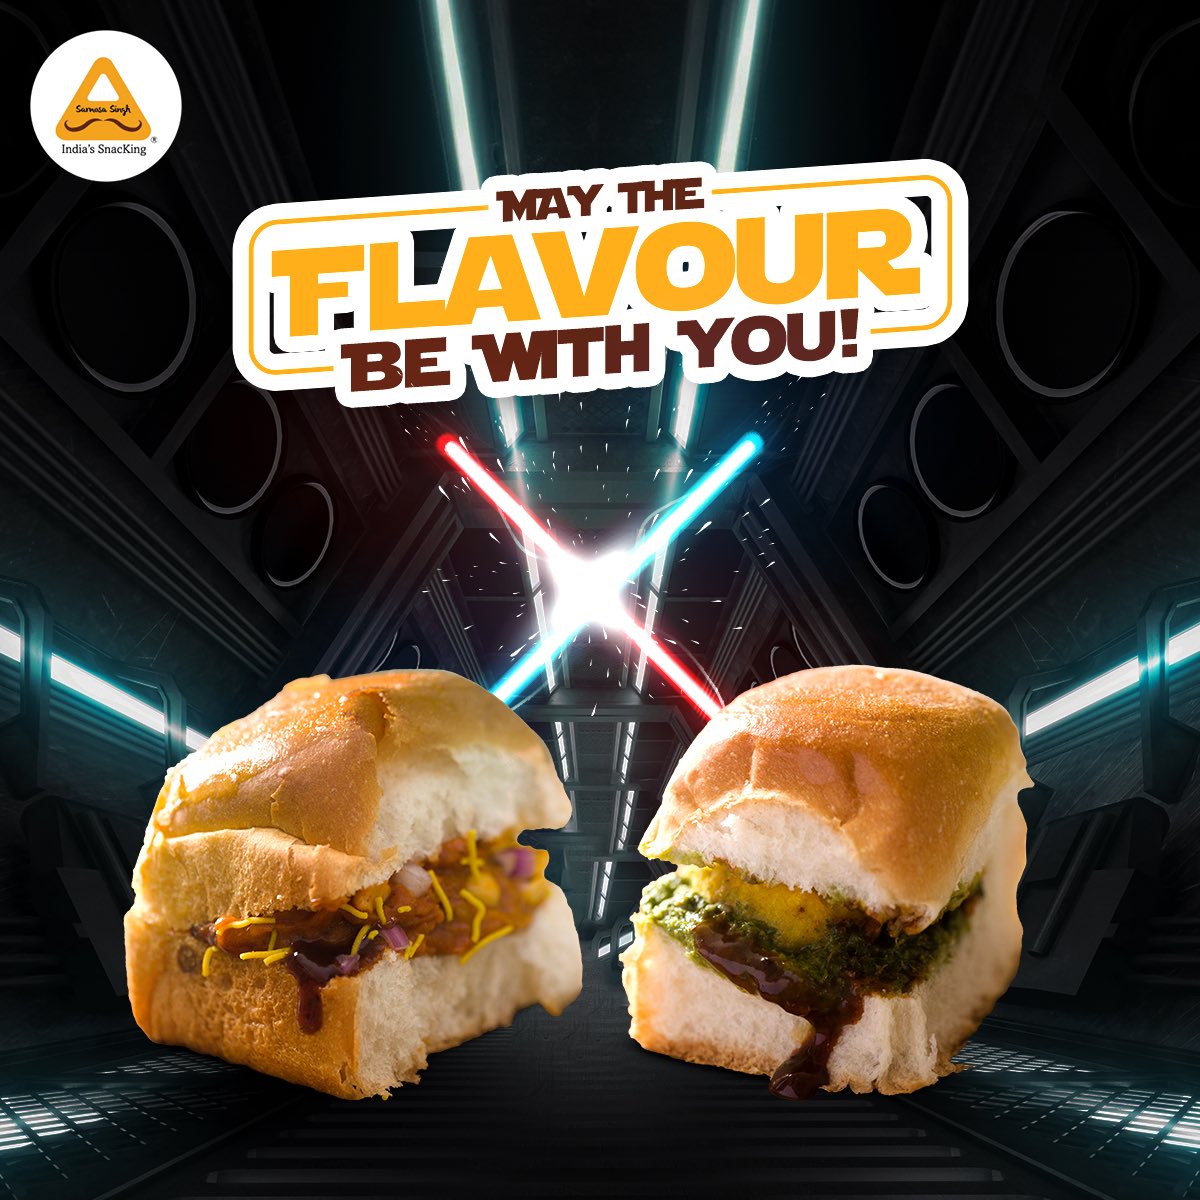 We hope that the ‘fourth’ and ‘flavour’ both be with you! Happy flavourful May 4th! 

#foodstagram #snacks #streetfoodindia #indiansnacks #mouthparty #samosasingh #indiasnacking #samosasingh_in #snackingmatlabsamosasingh #snacking
#samosa #samosalover #loveforsamosa #lovesamosa